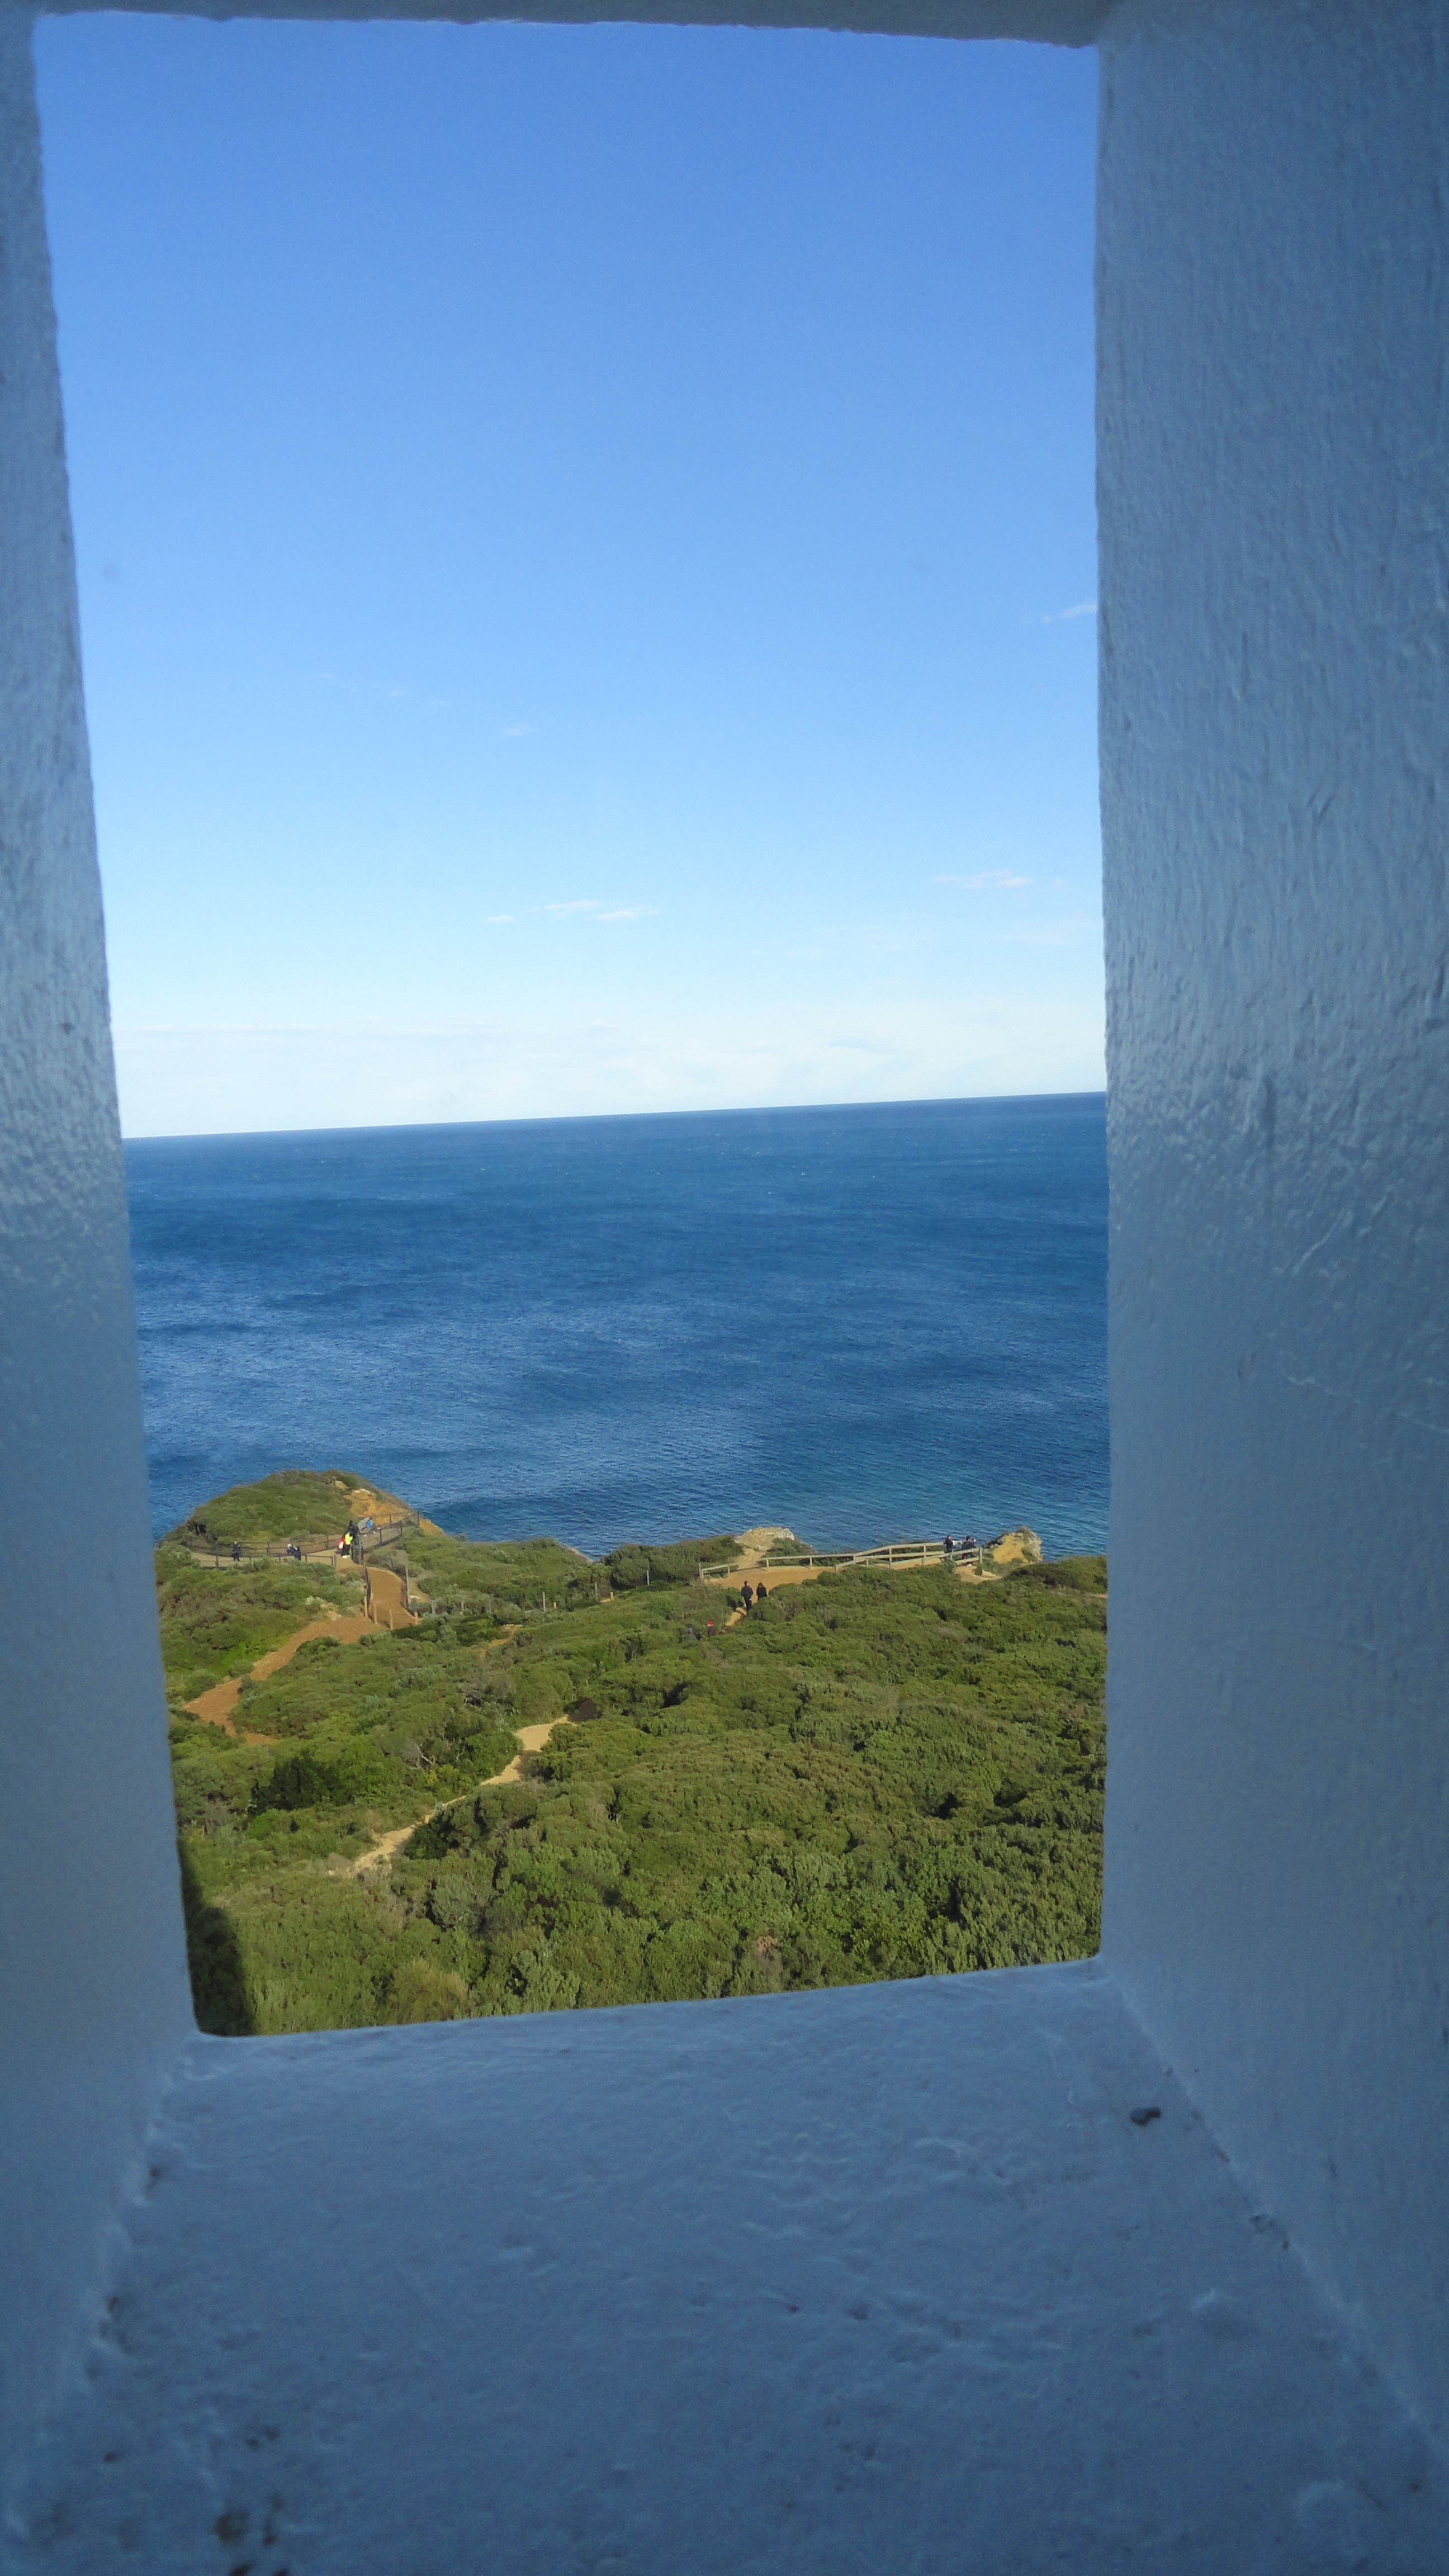 A view of the sea from the Split Point Lighthouse at Aireys Inlet.